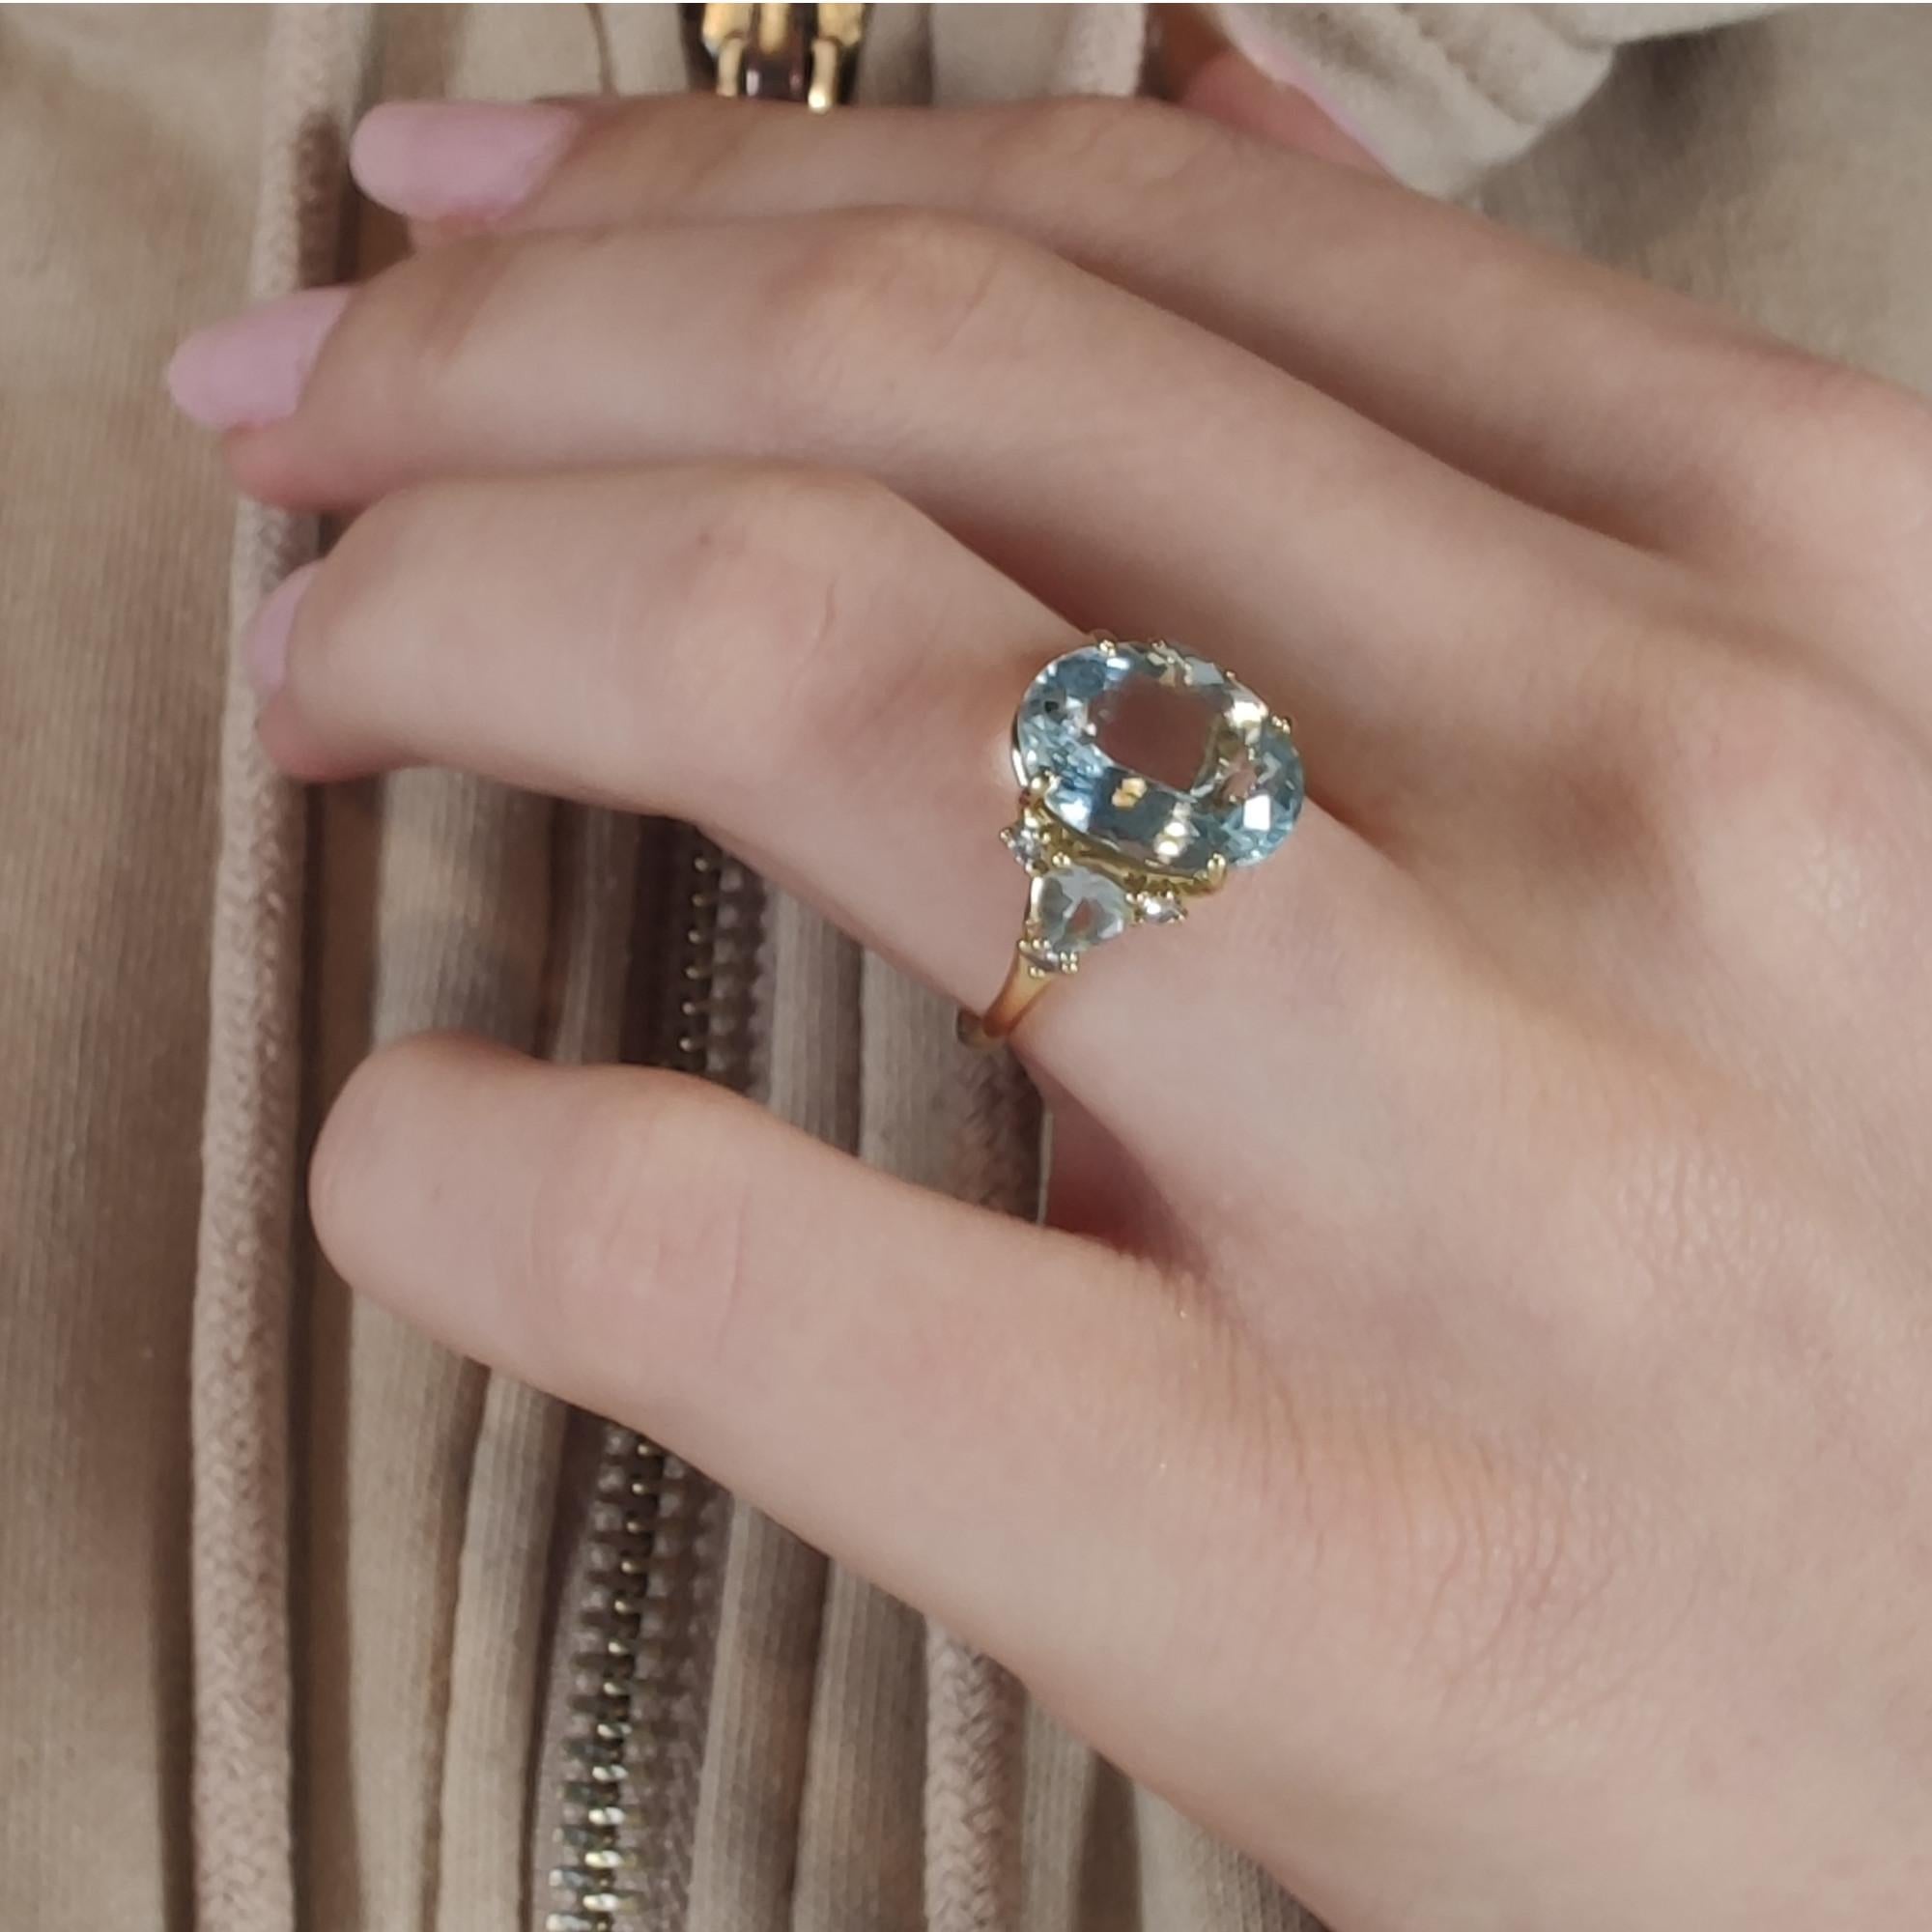 Elevate your moment with a unique 18kt solid gold ring, meticulously handcrafted and designed with precious gemstones – aquamarine and diamonds. A one-of-a-kind piece for women, perfect for weddings, proposals, and engagements. Make a statement with